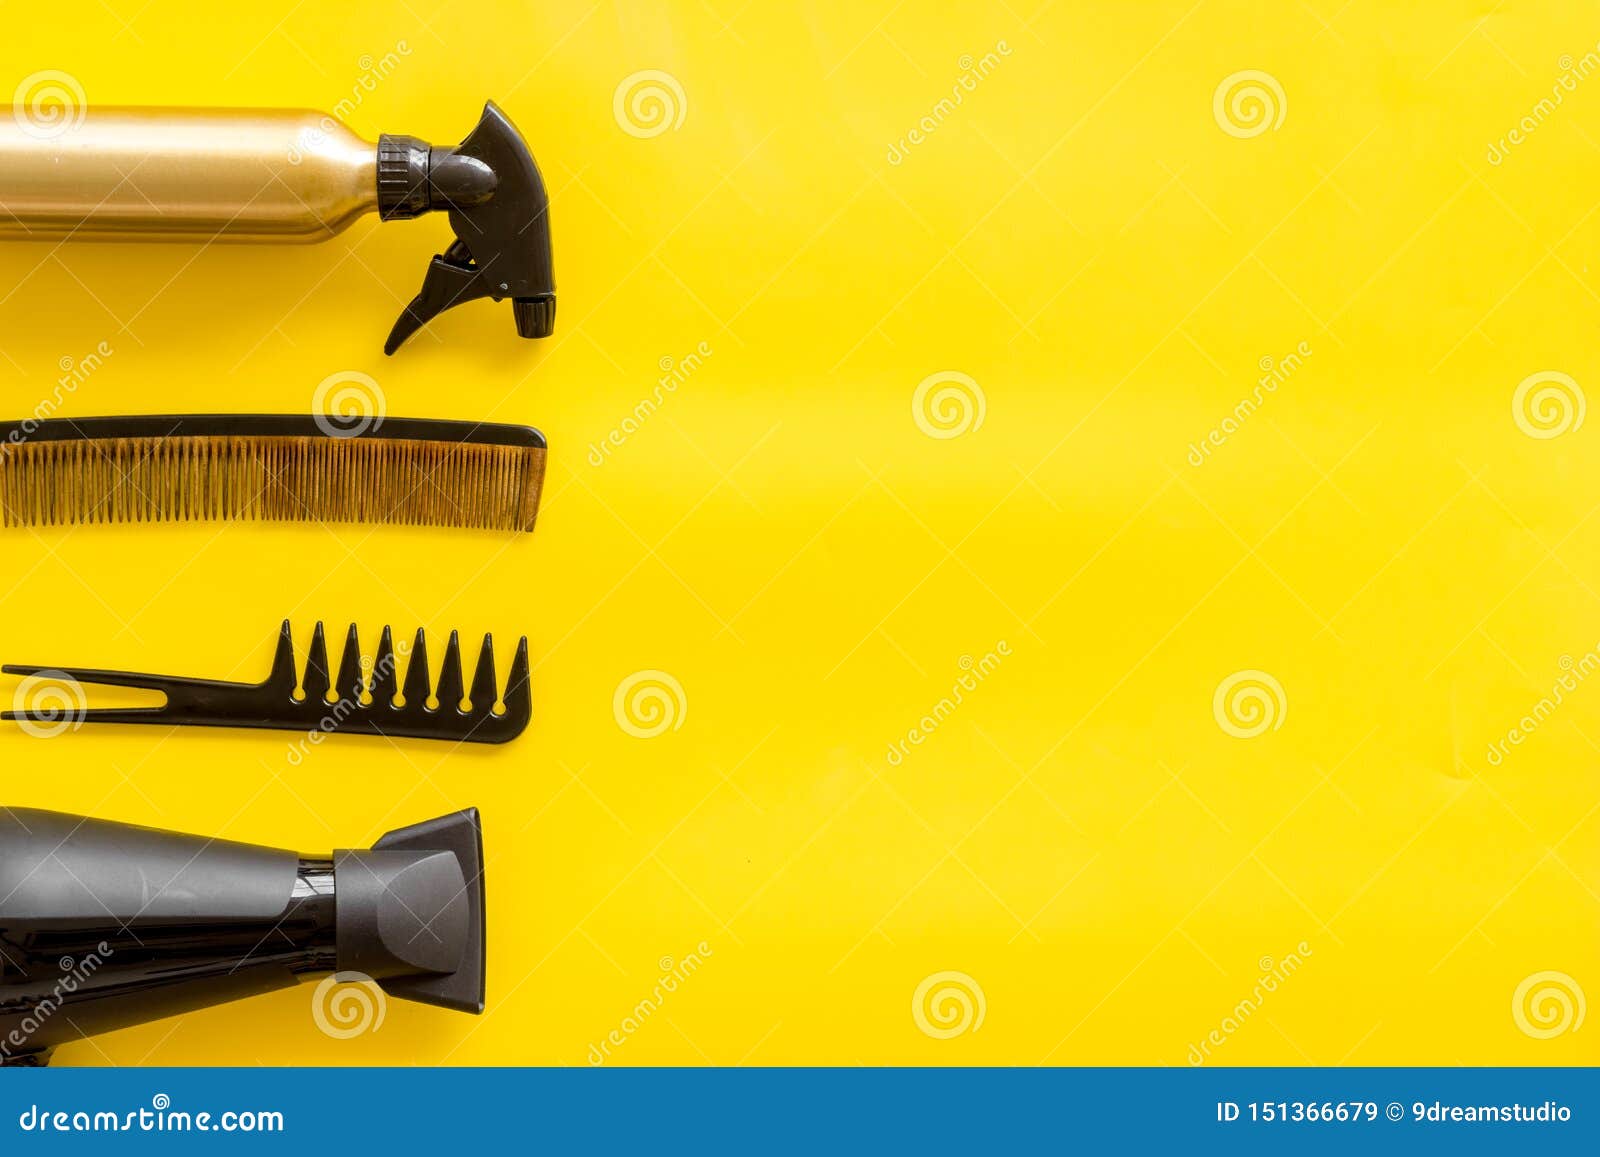 Combs Spray Dryer And Hairdresser Tools In Beauty Salon Work Desk On Yellow Background Top View Mockup Stock Image Image Of Brush Table 151366679